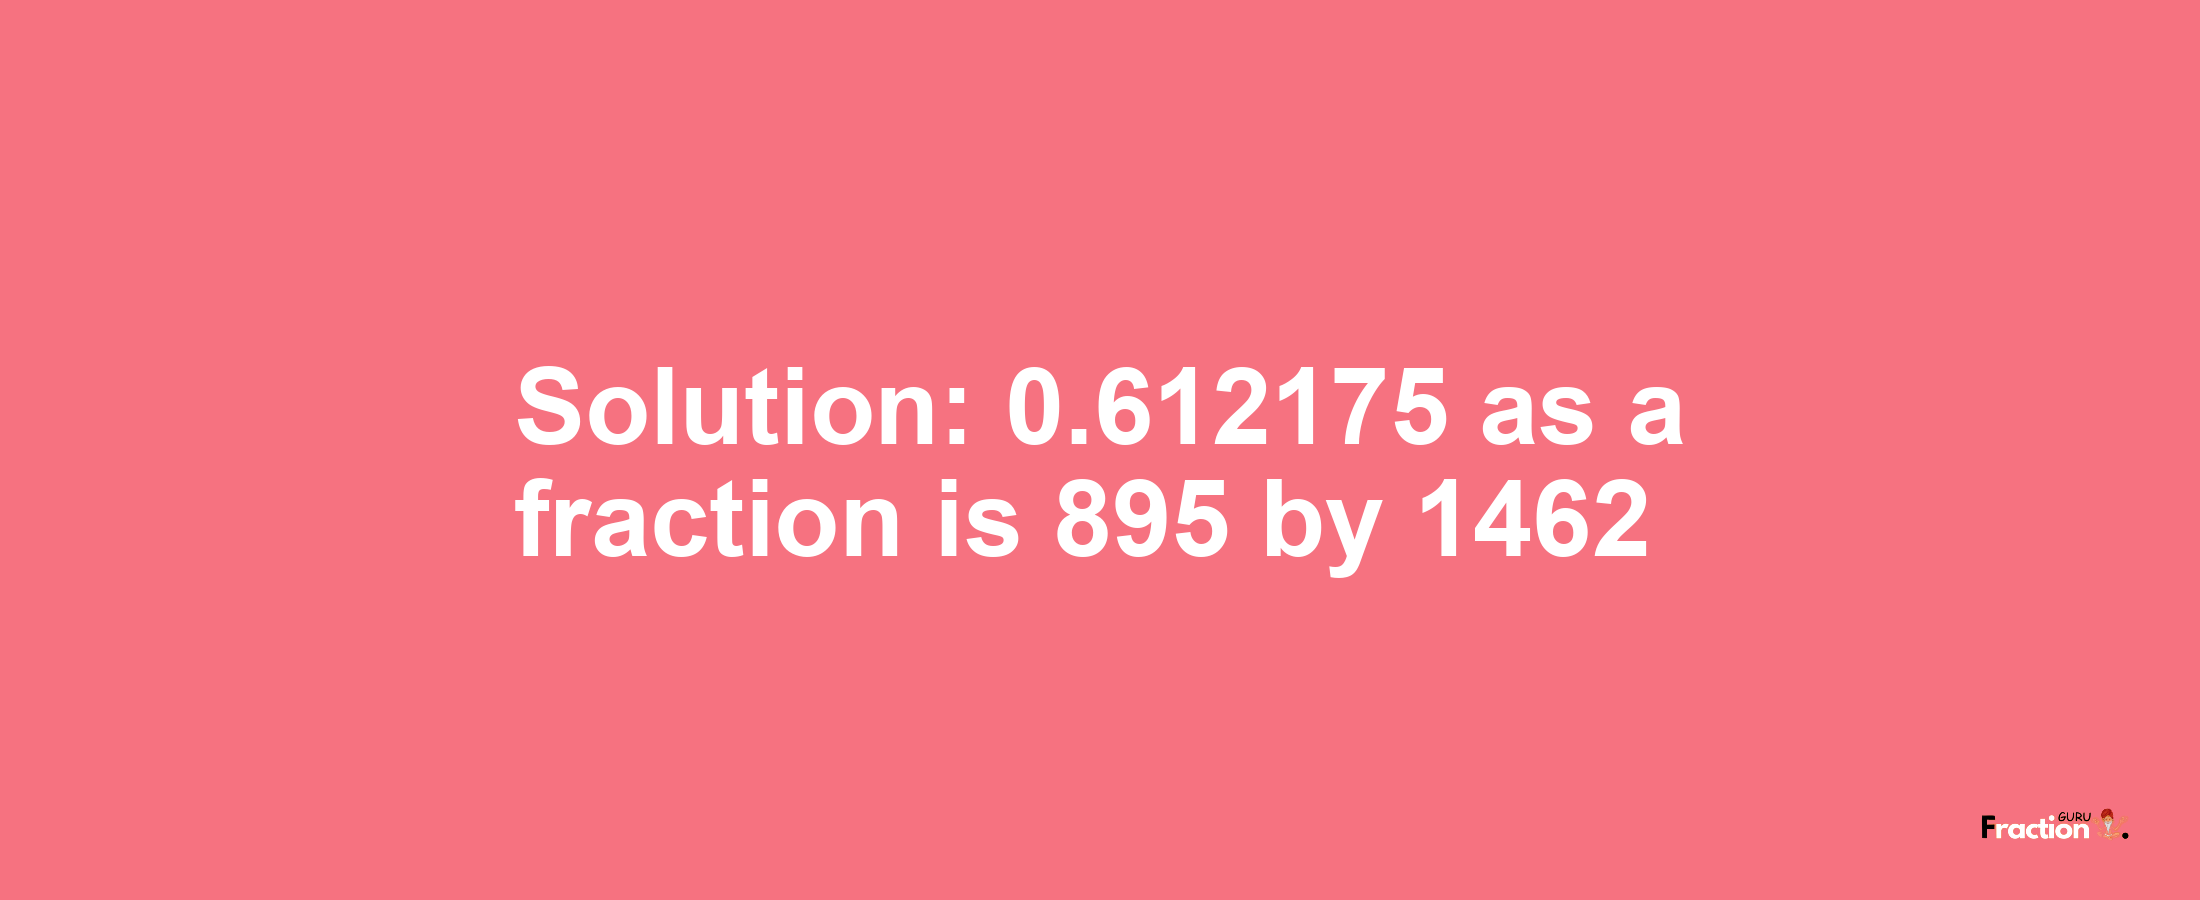 Solution:0.612175 as a fraction is 895/1462